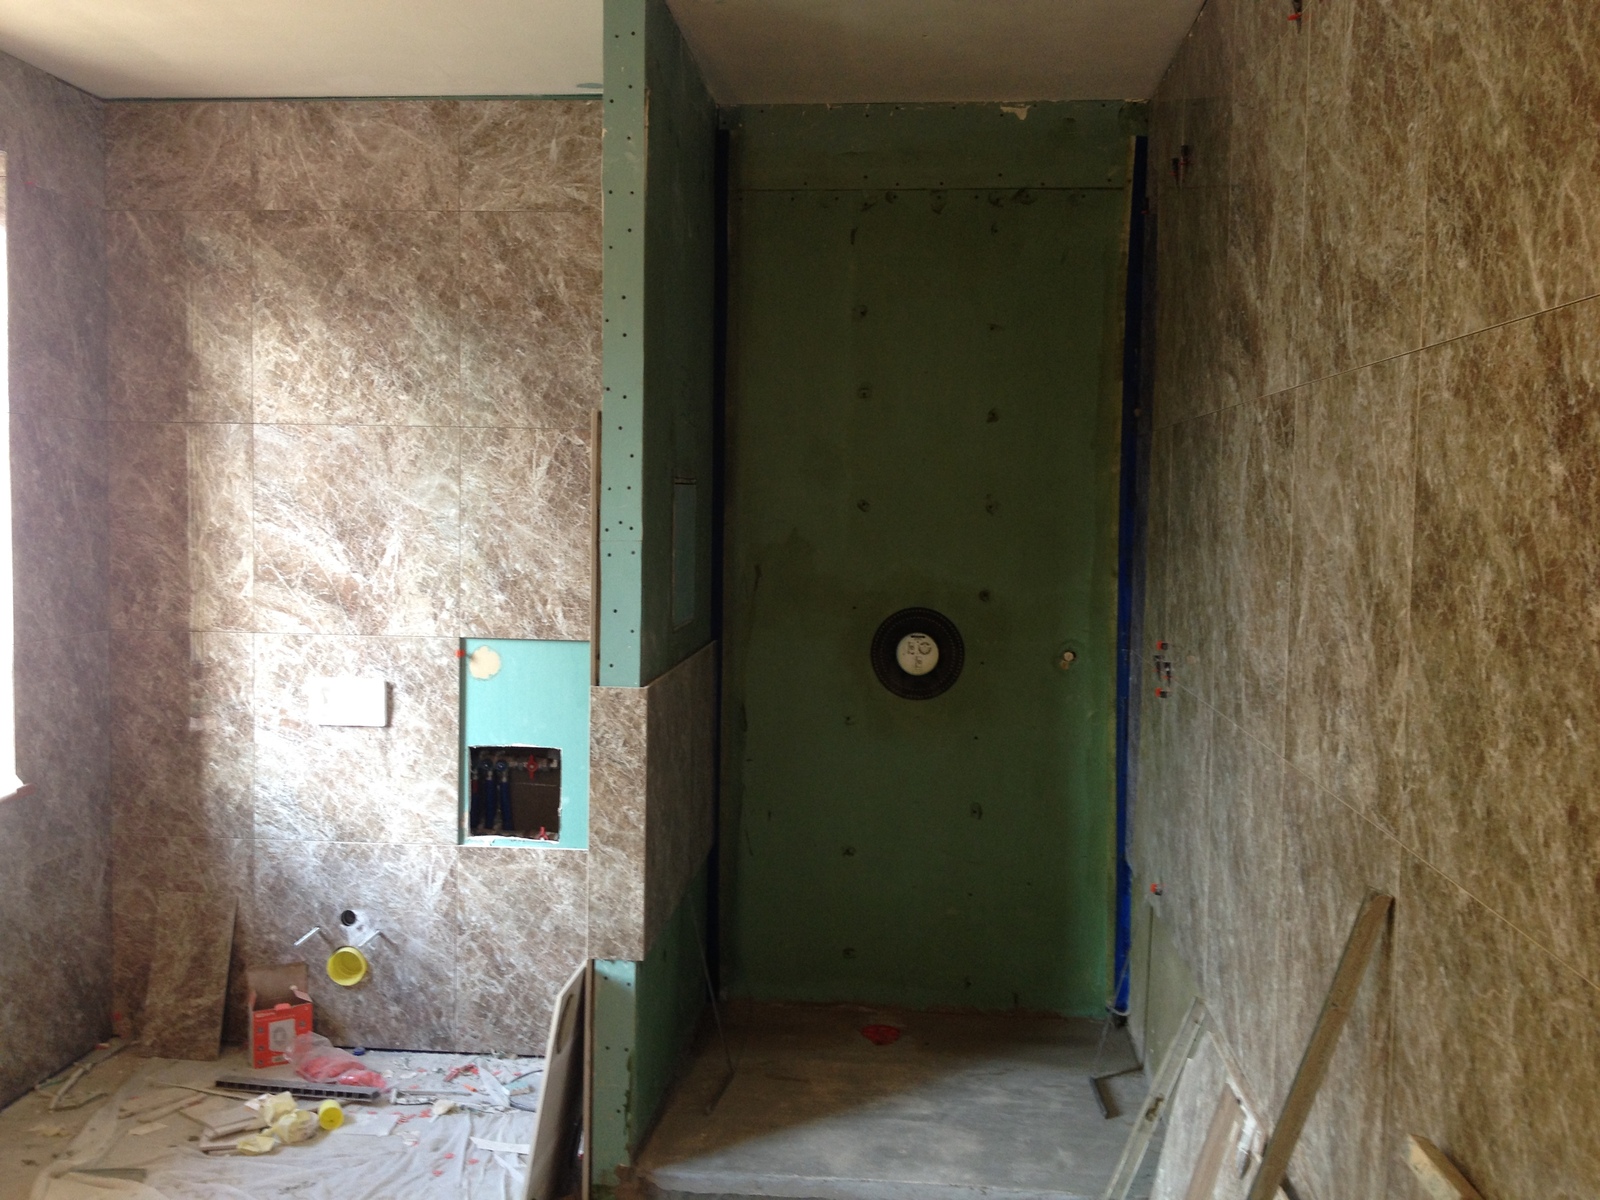 Bathroom renovation part 1.5 - My, Repair, , With your own hands, Courage and not dementia, Longpost, Combined bathroom